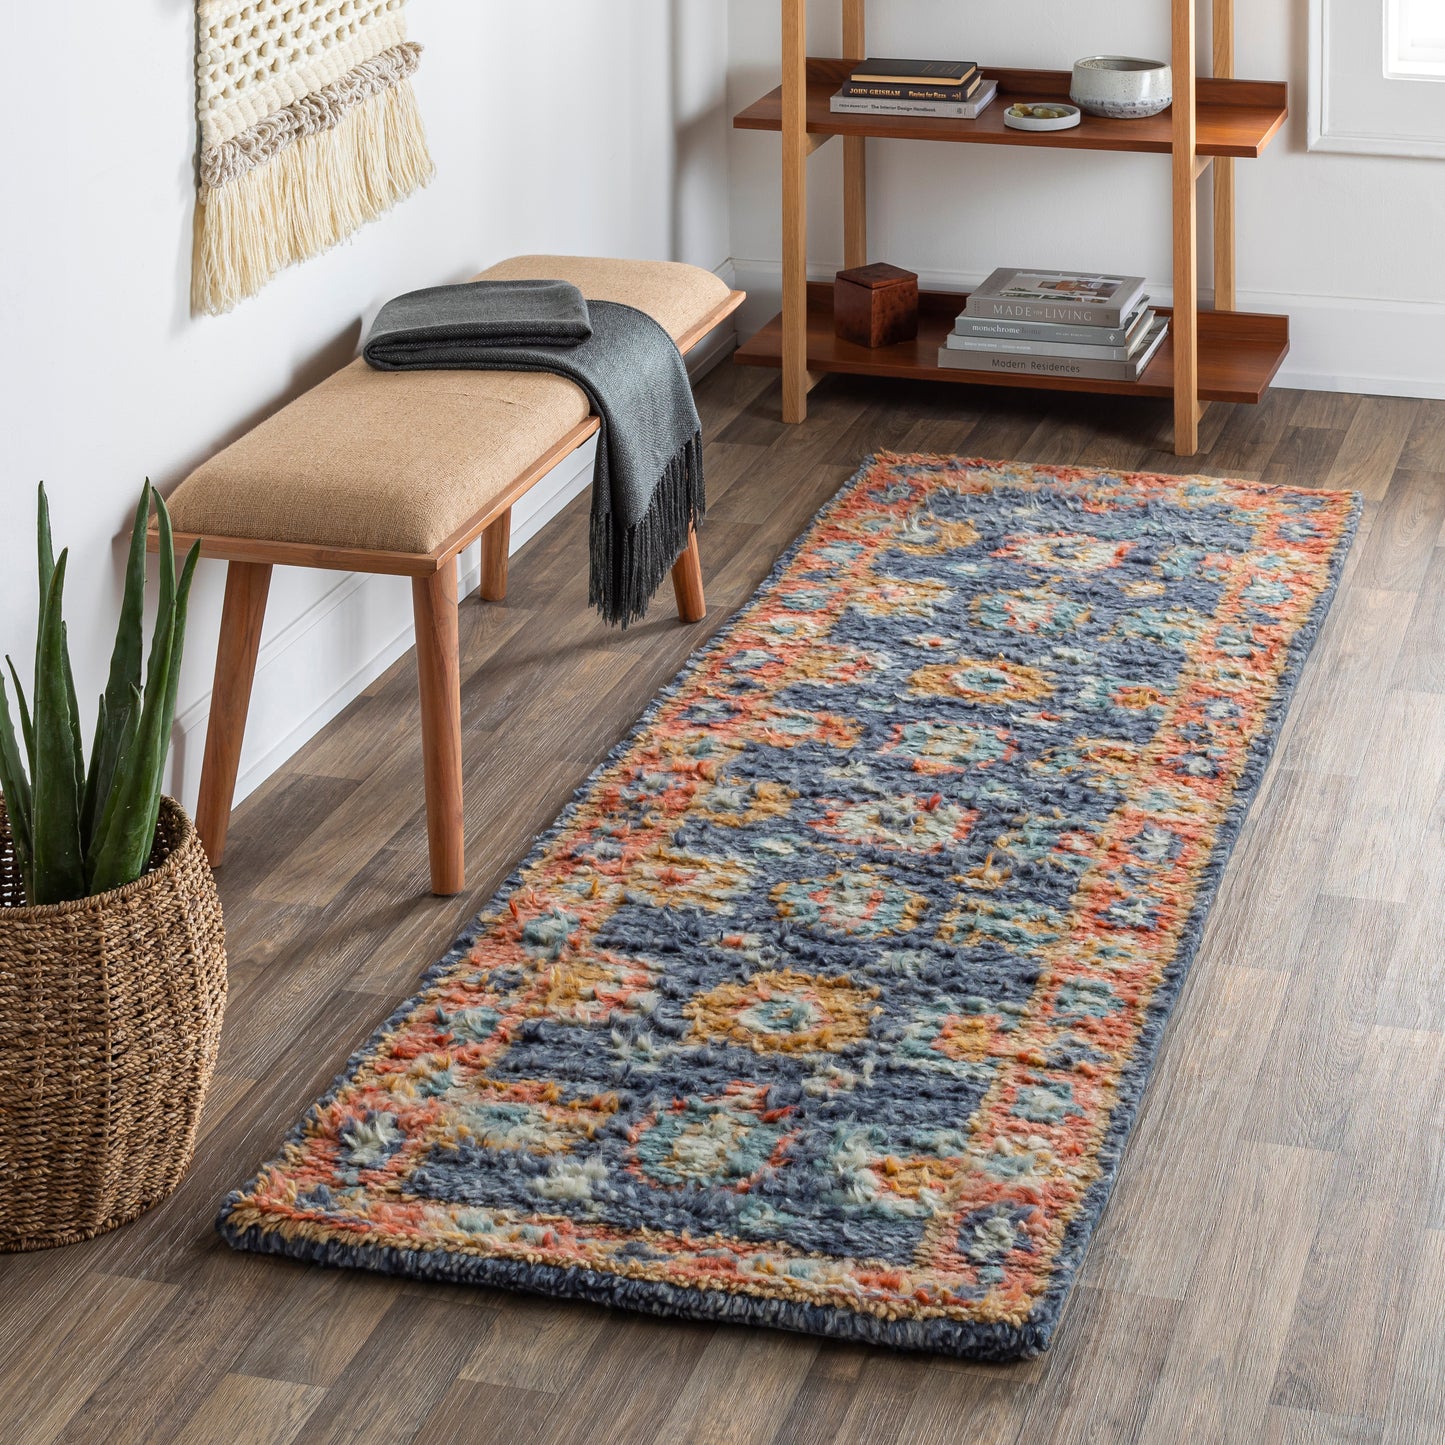 Marrakech 29601 Hand Knotted Wool Indoor Area Rug by Surya Rugs